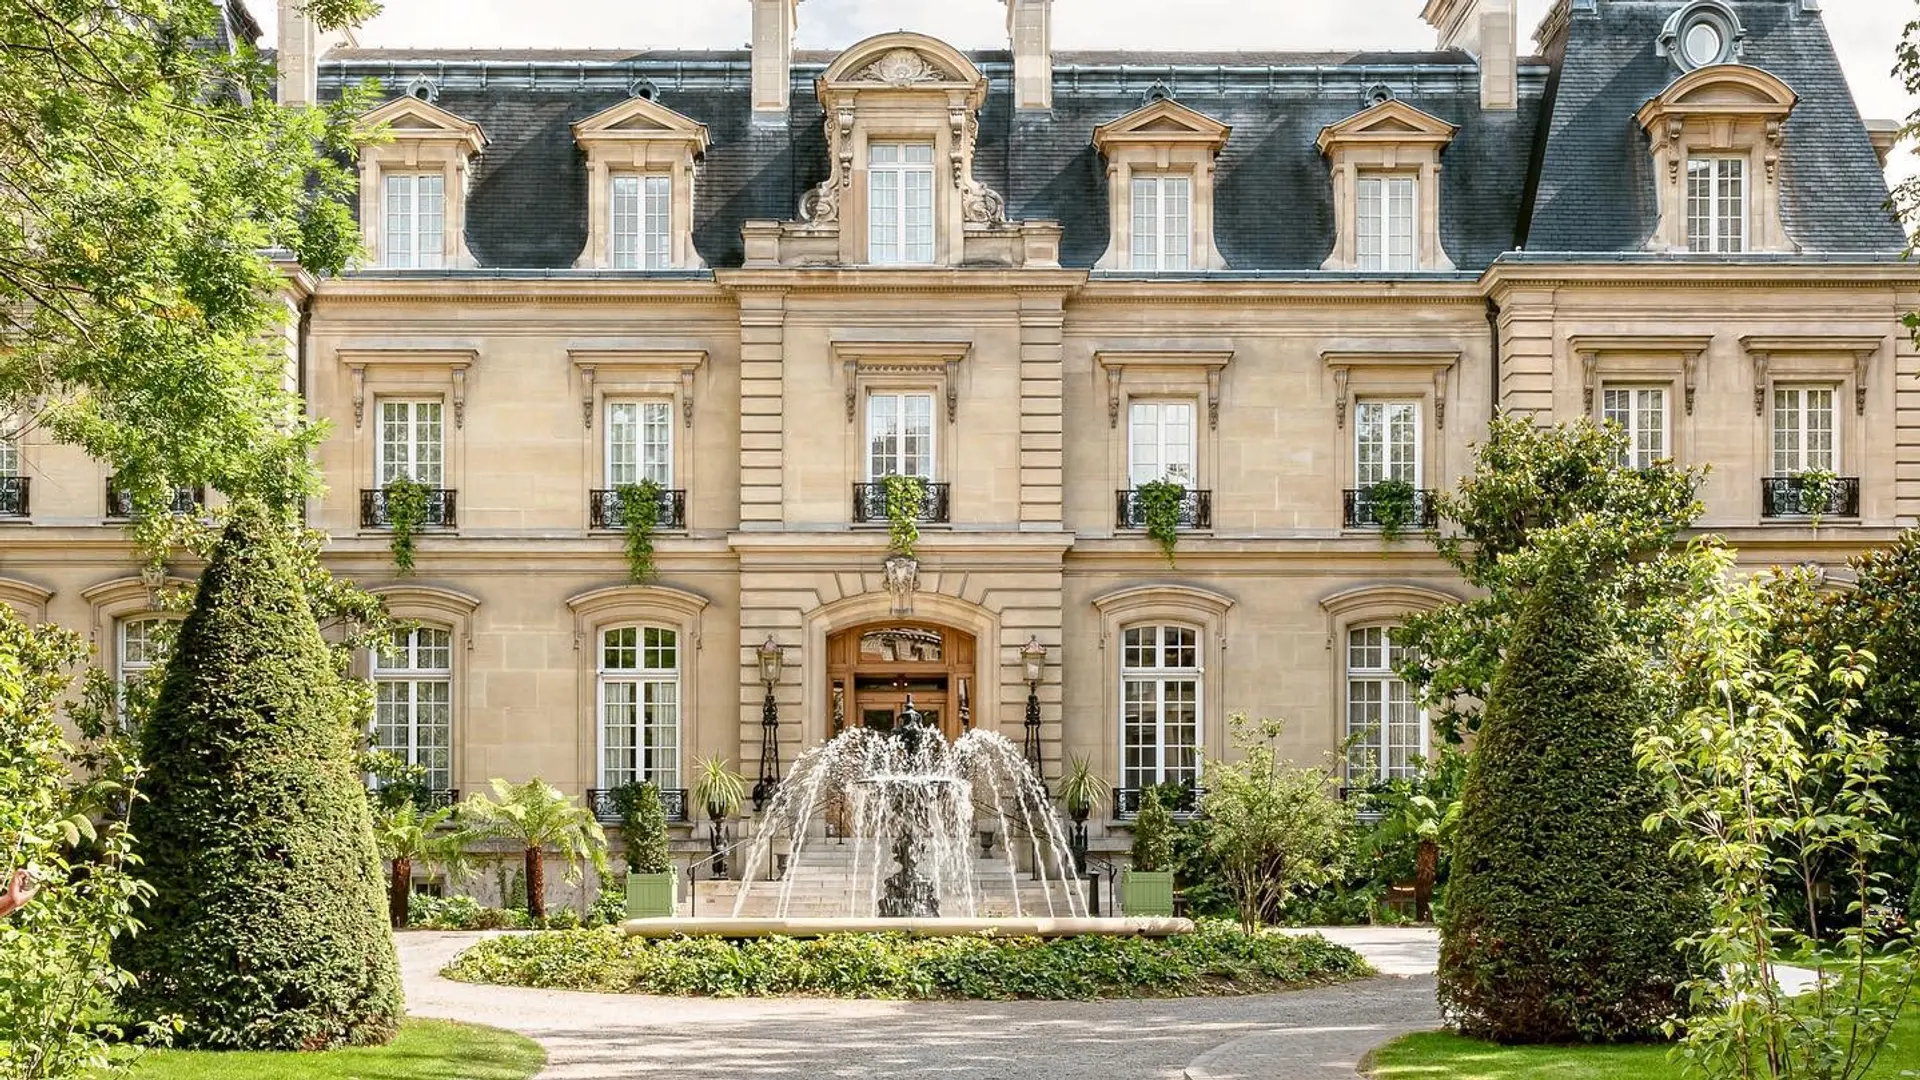 Outside of saint james paris with a fountain infront of the main entrance surrounded by plants and trees